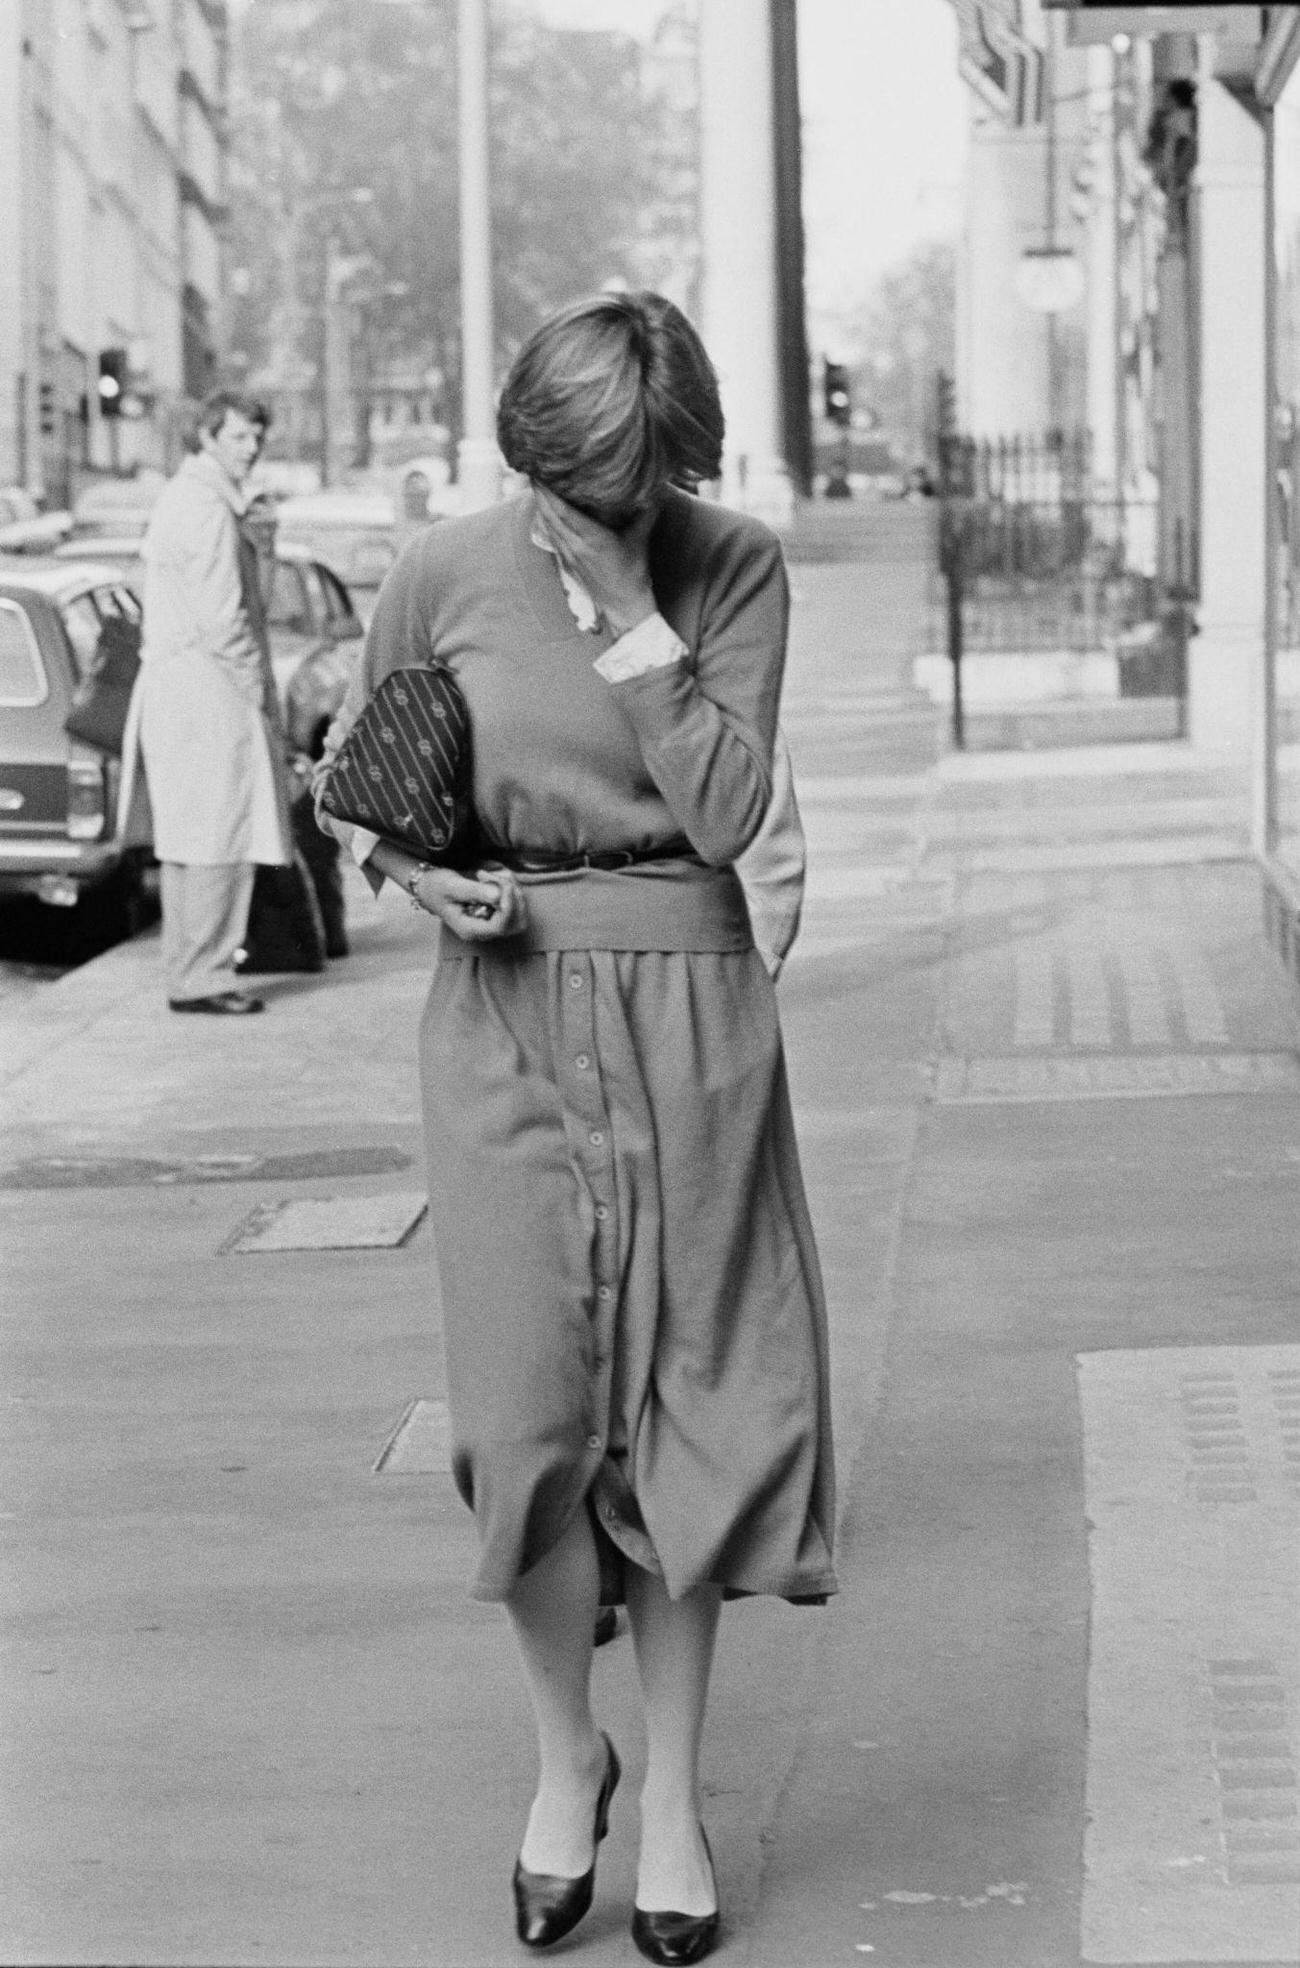 Lady Diana covers her face as she walk on a street in London, UK, 17th November 1980; she is wearing cardigan and midi skirts buttoned on front.